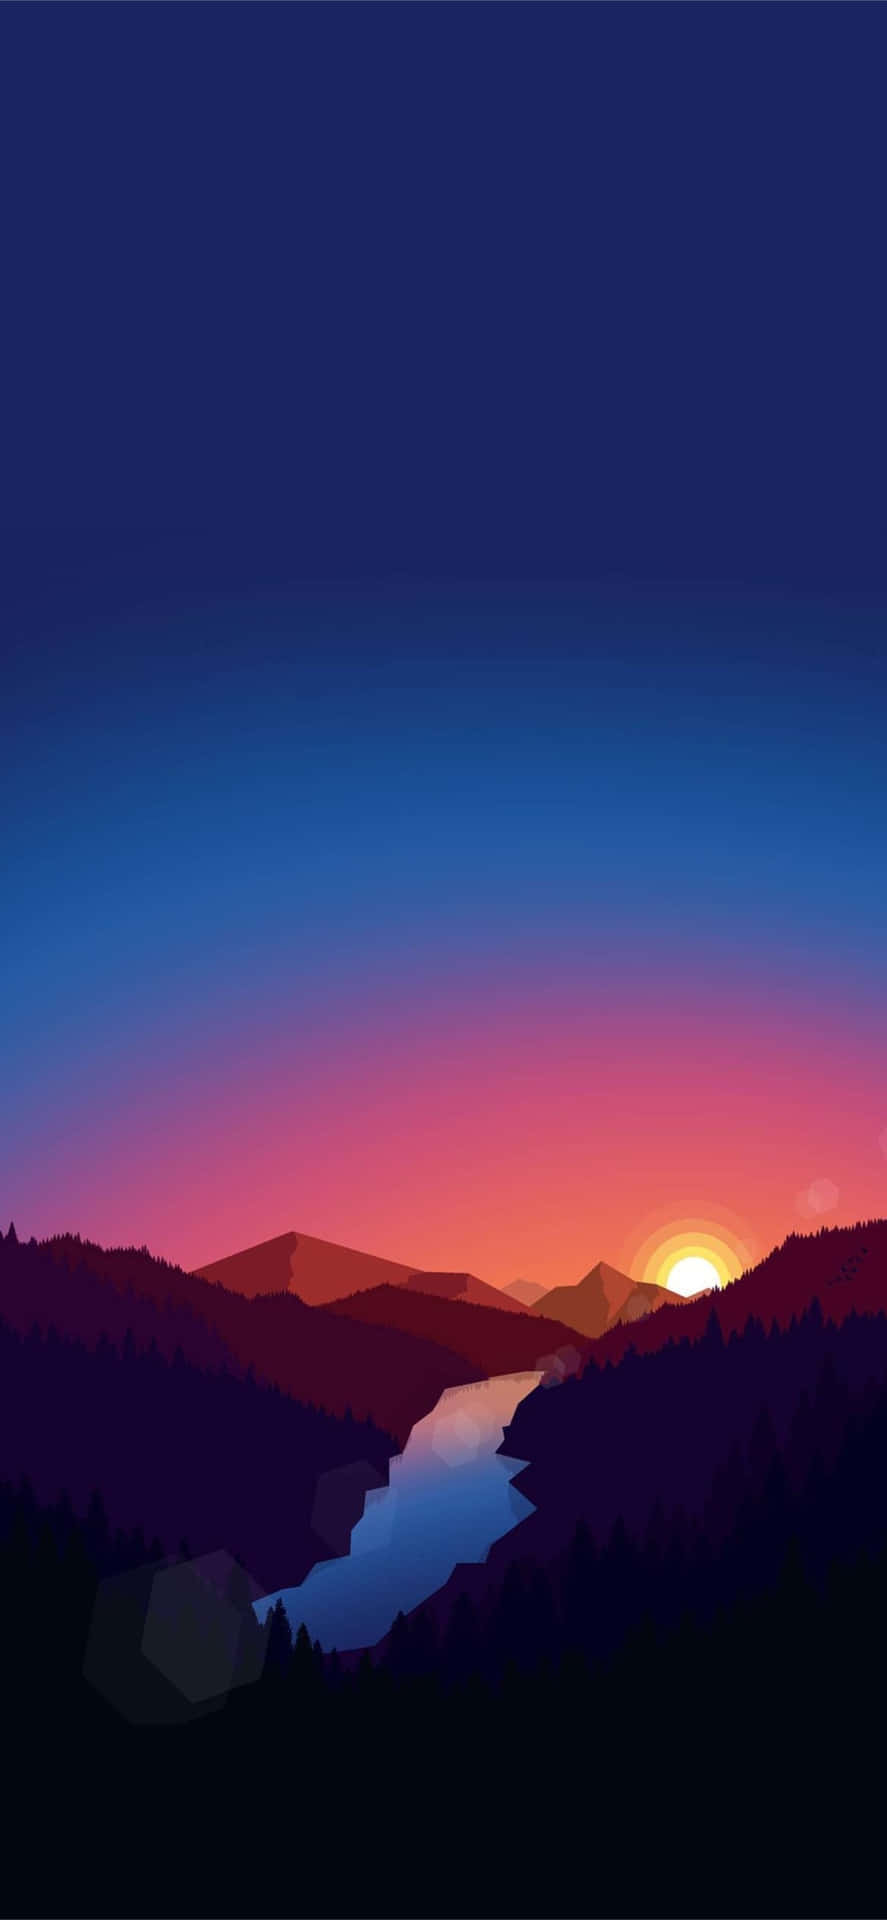 A Sunset Over A Mountain Landscape